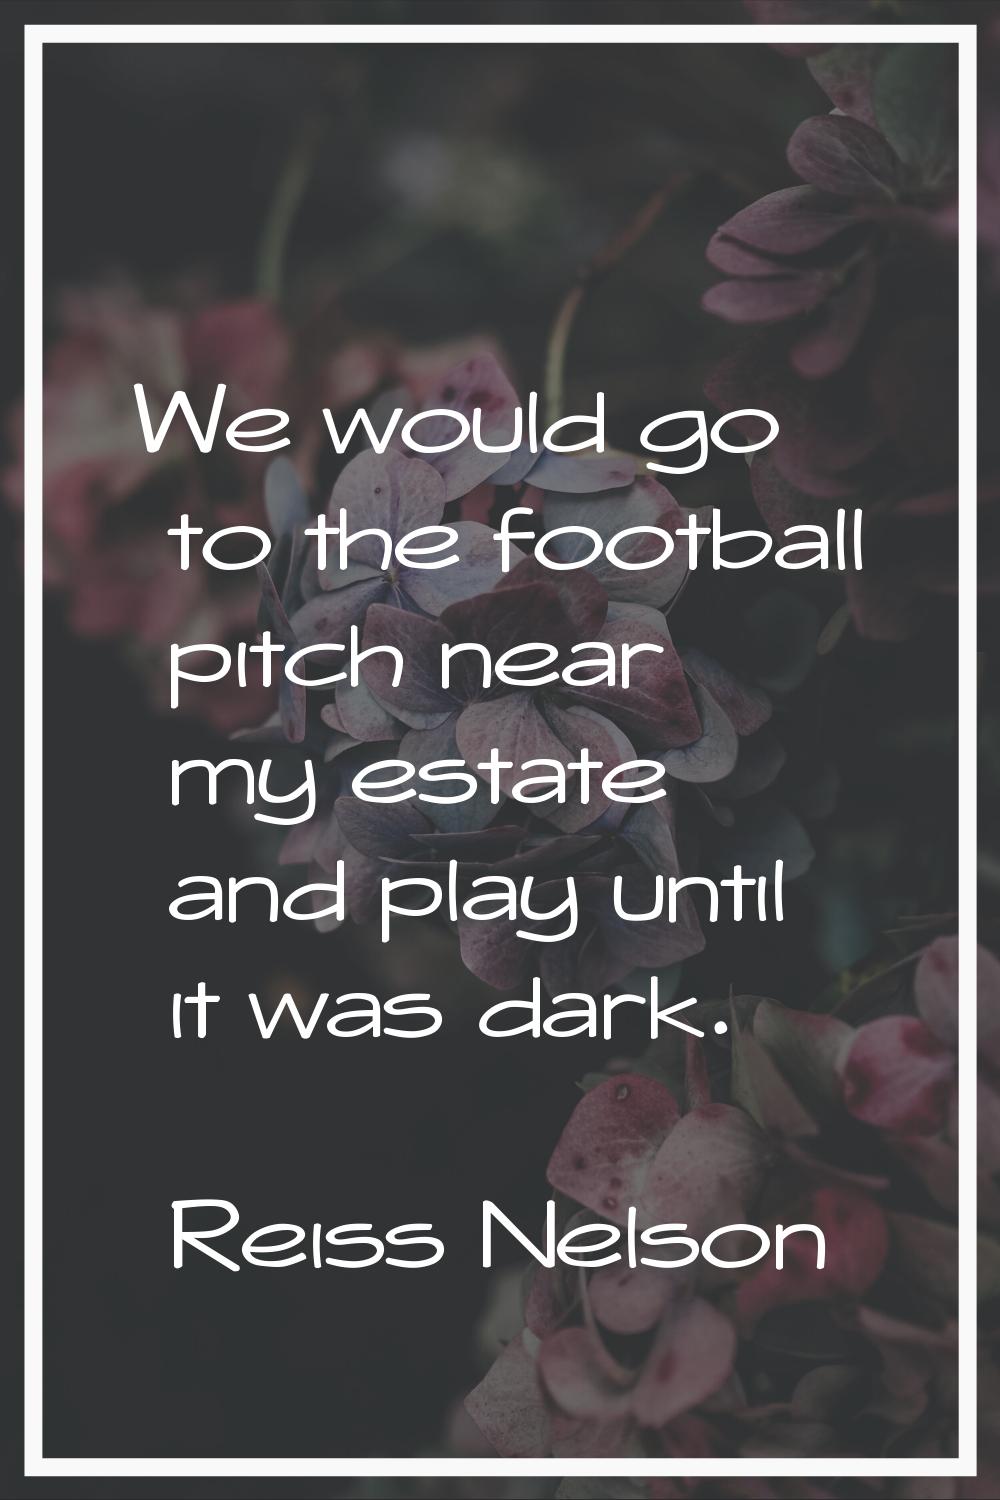 We would go to the football pitch near my estate and play until it was dark.